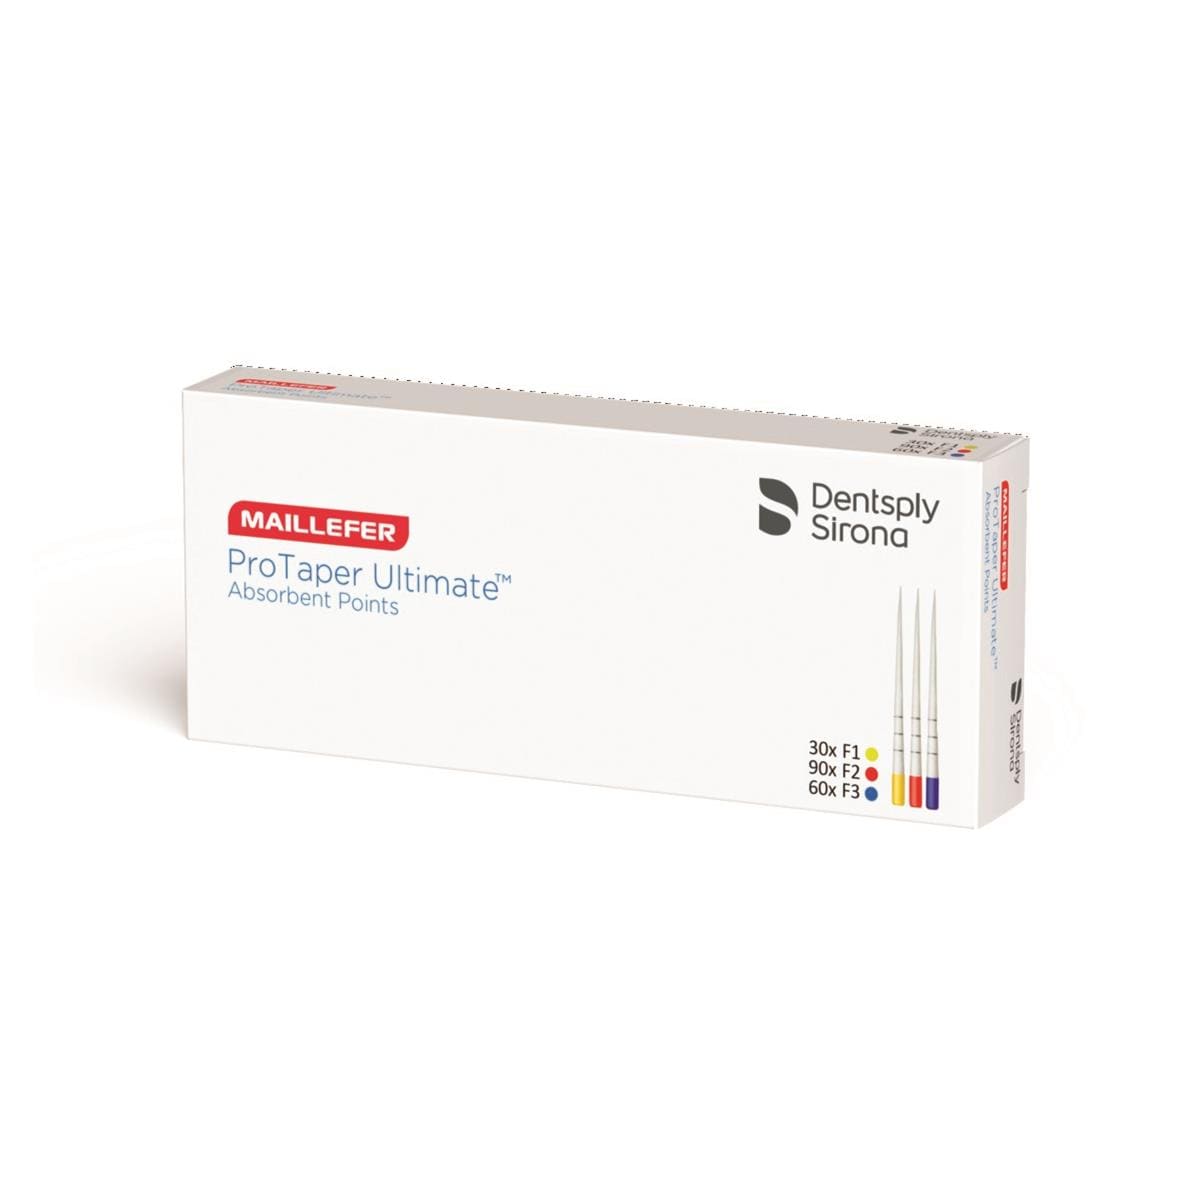 ProTaper Ultimate Absorbent Point F2 (bote de 180) Dentsply Sirona